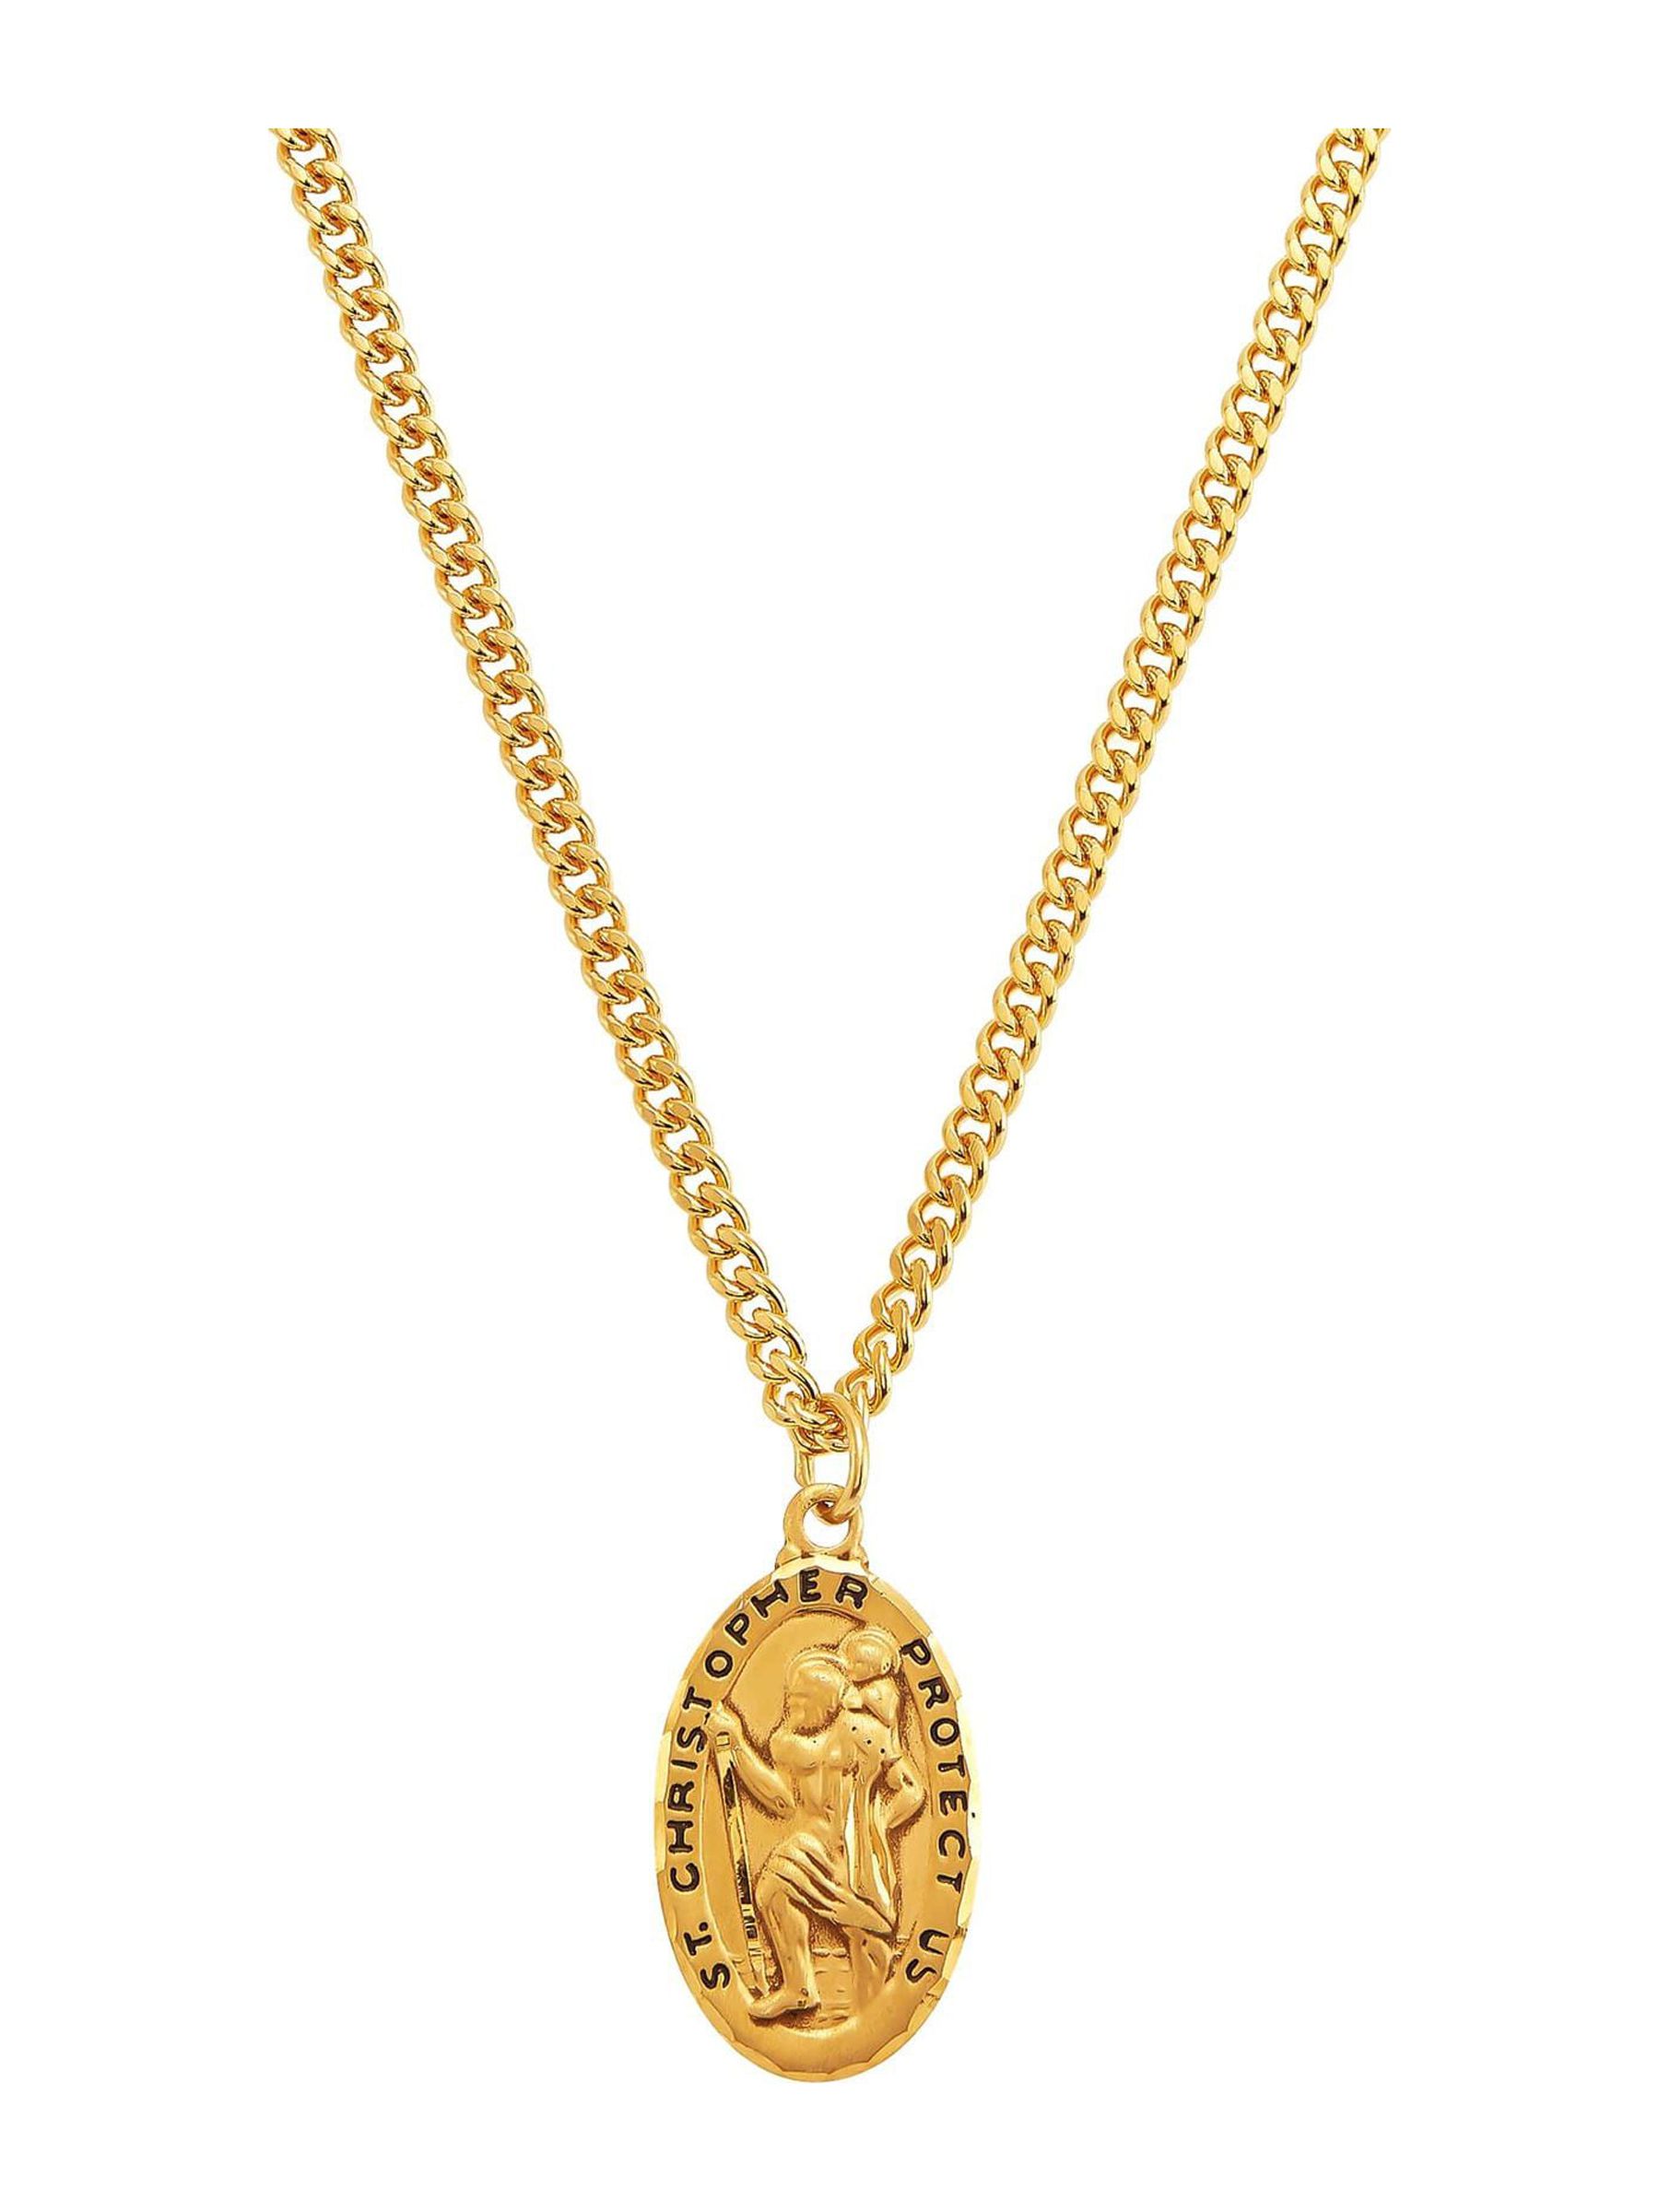 Finecraft 'St. Christopher Medallion Necklace' in Gold-Plated Sterling Silver & Stainless Steel, 24" - image 1 of 5